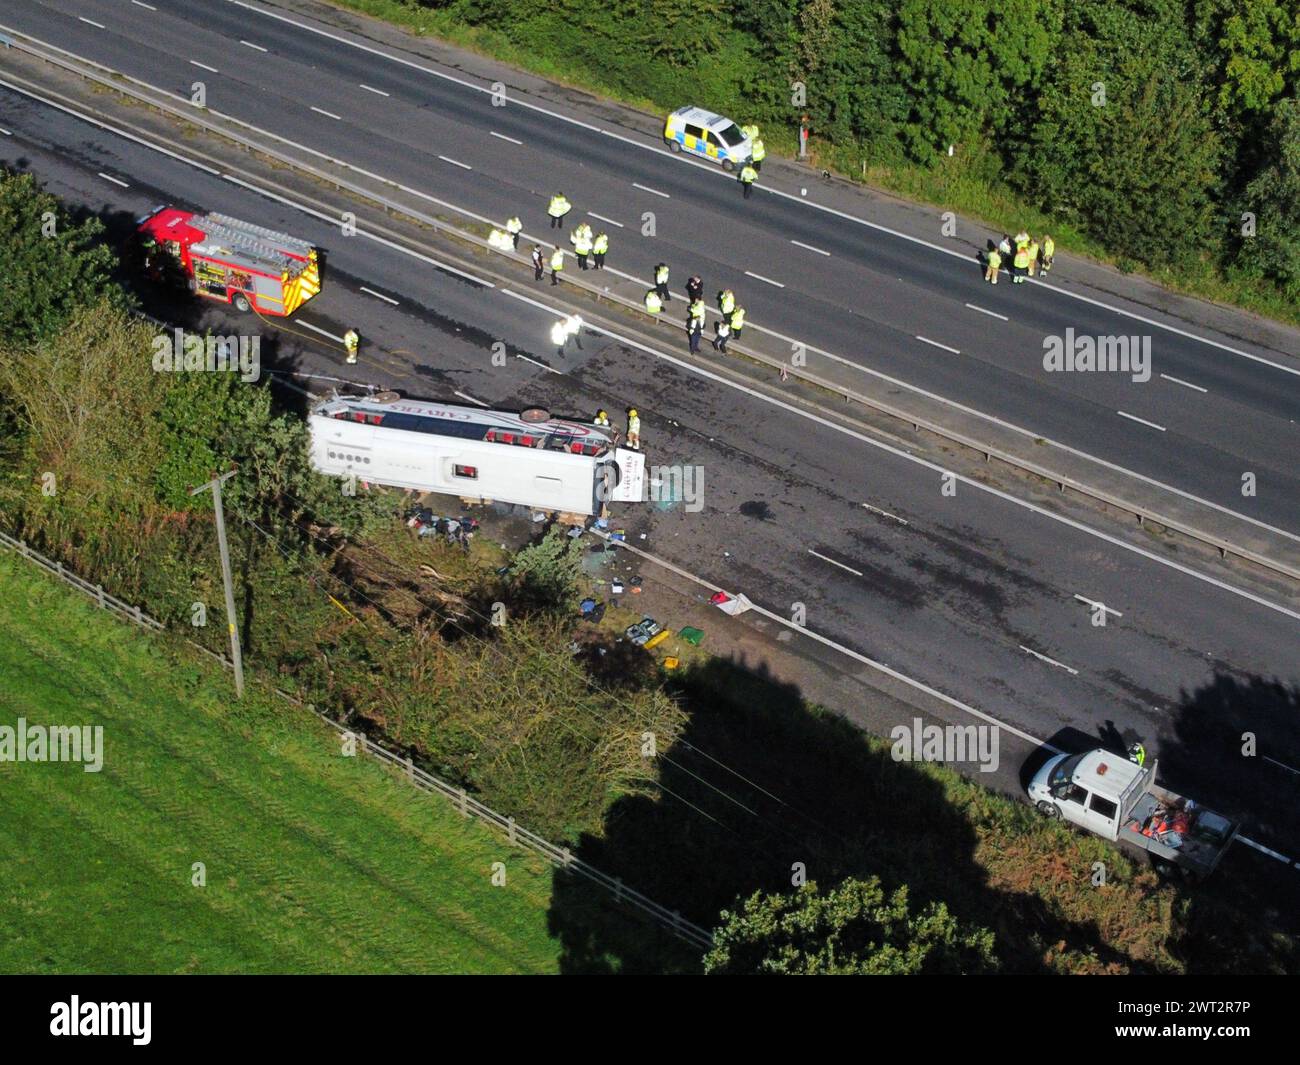 File photo dated 29/9/2023 of emergency services at the scene of a coach crash on the M53 motorway, between junction 5 at Ellesmere Port and junction 4 at Bebbington. The driver of a school bus which crashed on a motorway died from natural causes, a coroner's office has said. Stephen Shrimpton, 40, died when the coach he was driving crashed on the northbound M53 in Wirral, Merseyside, on September 29 last year as he was taking children to West Kirby and Calday Grange grammar schools. Jessica Baker, 15, one of about 50 students onboard, was killed in the crash just after 8am. Issue date: Friday Stock Photo